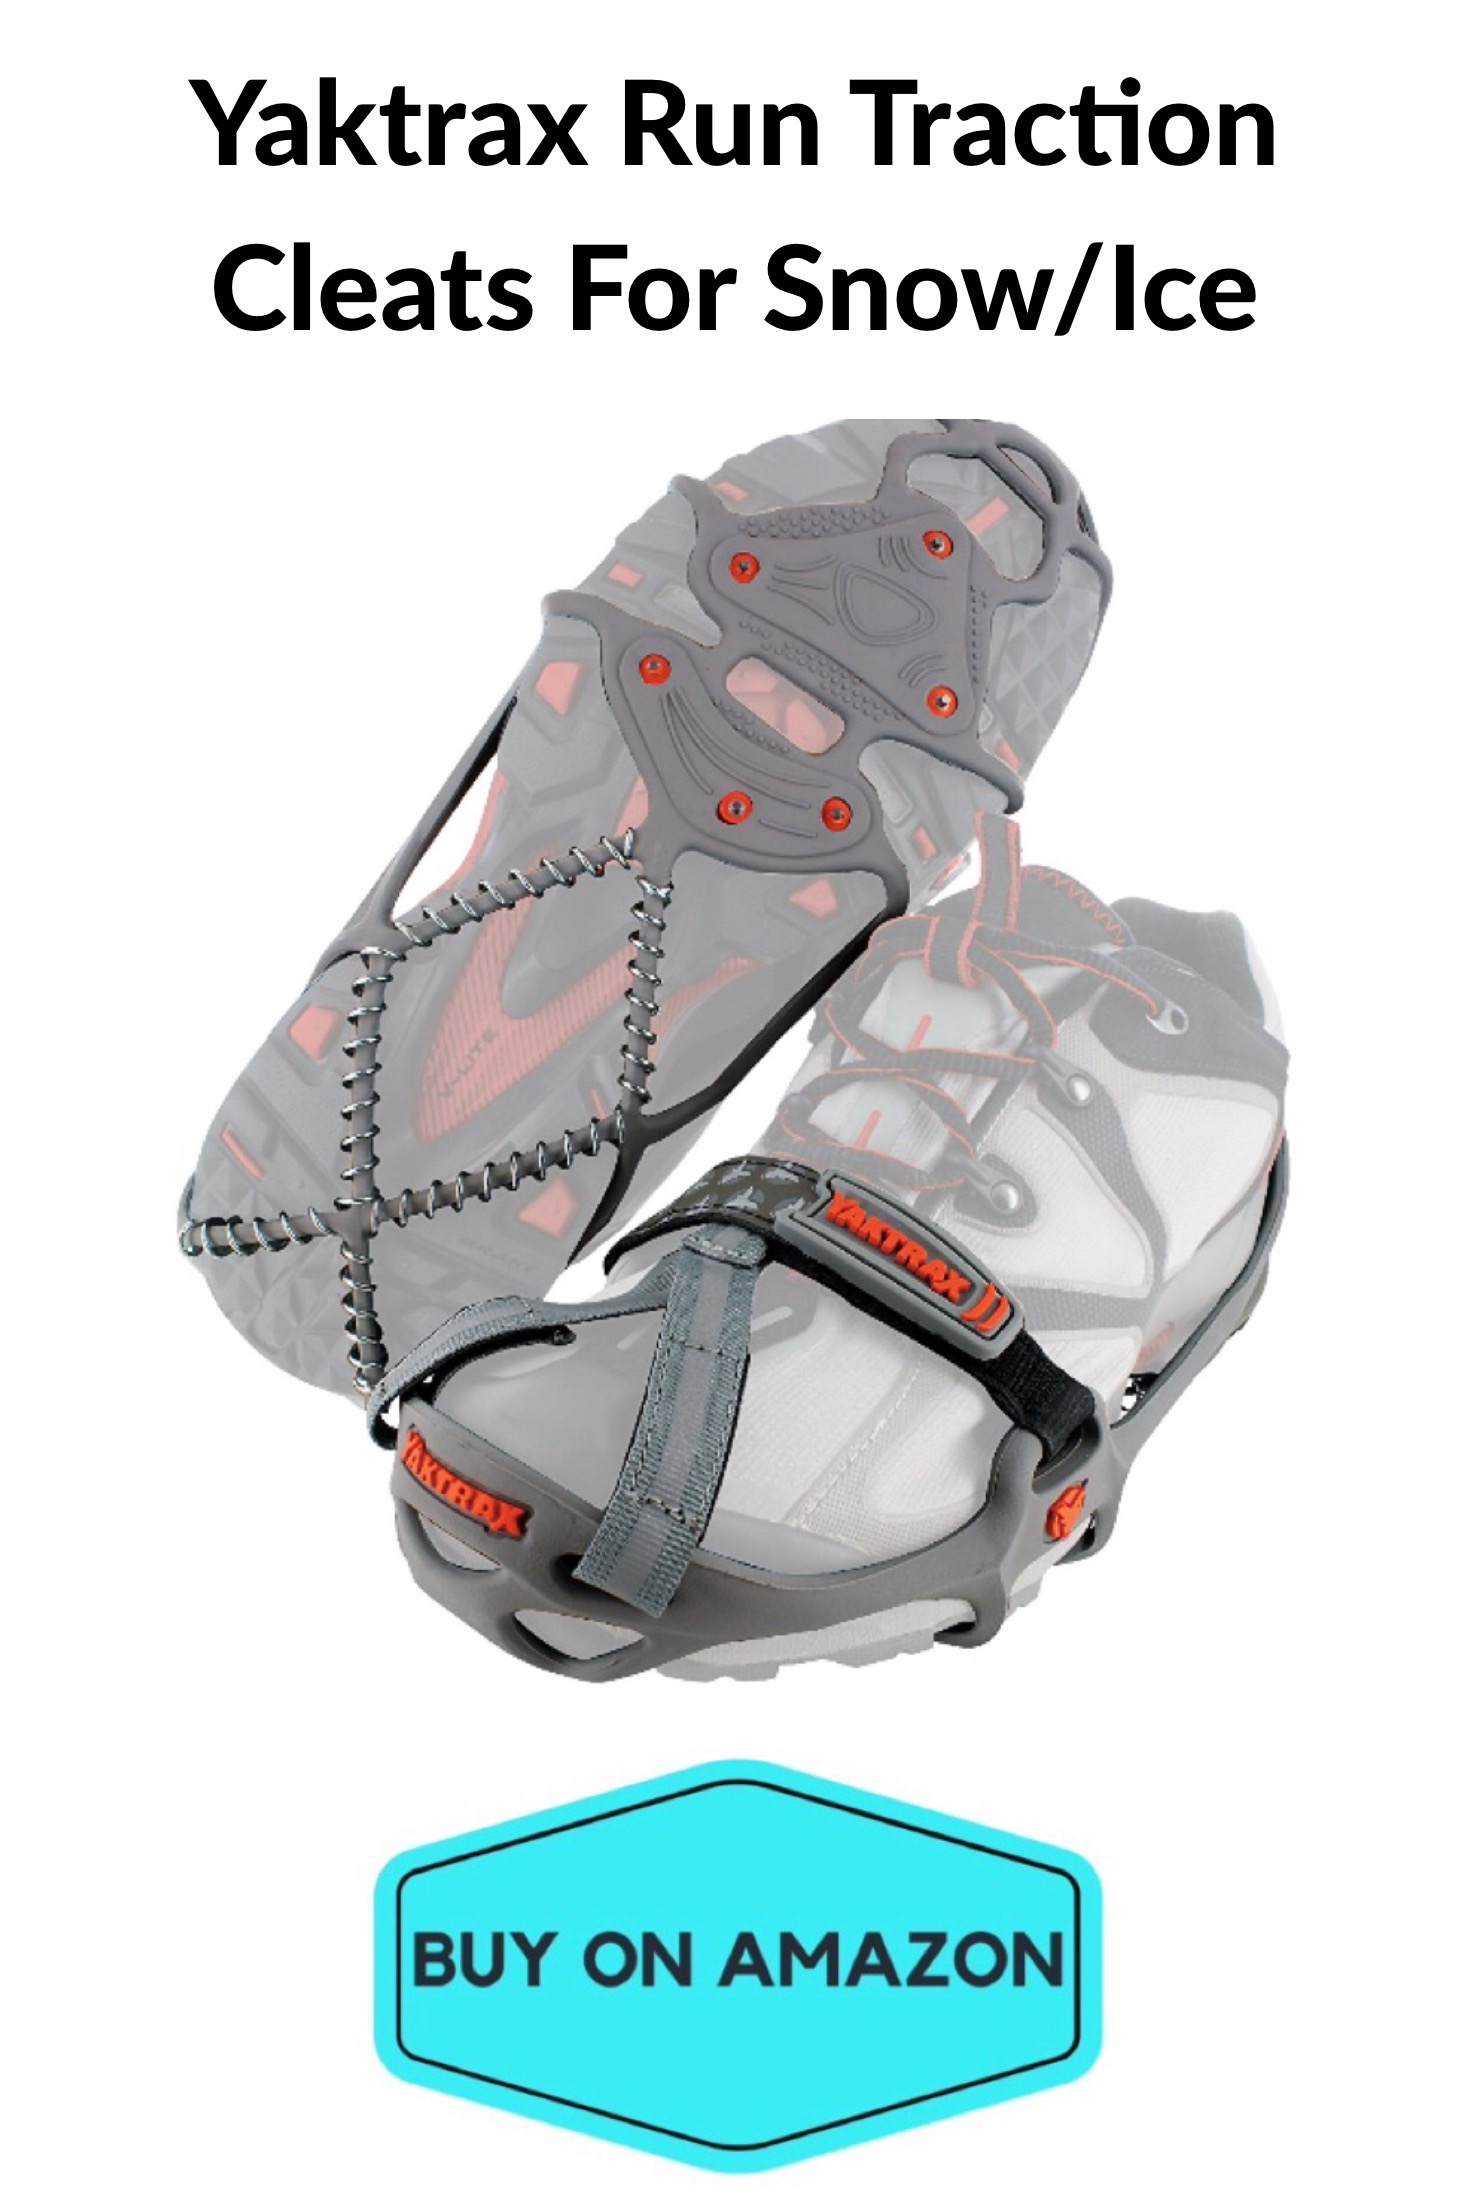 Yaktrax Run Traction Cleats For Snow/Ice